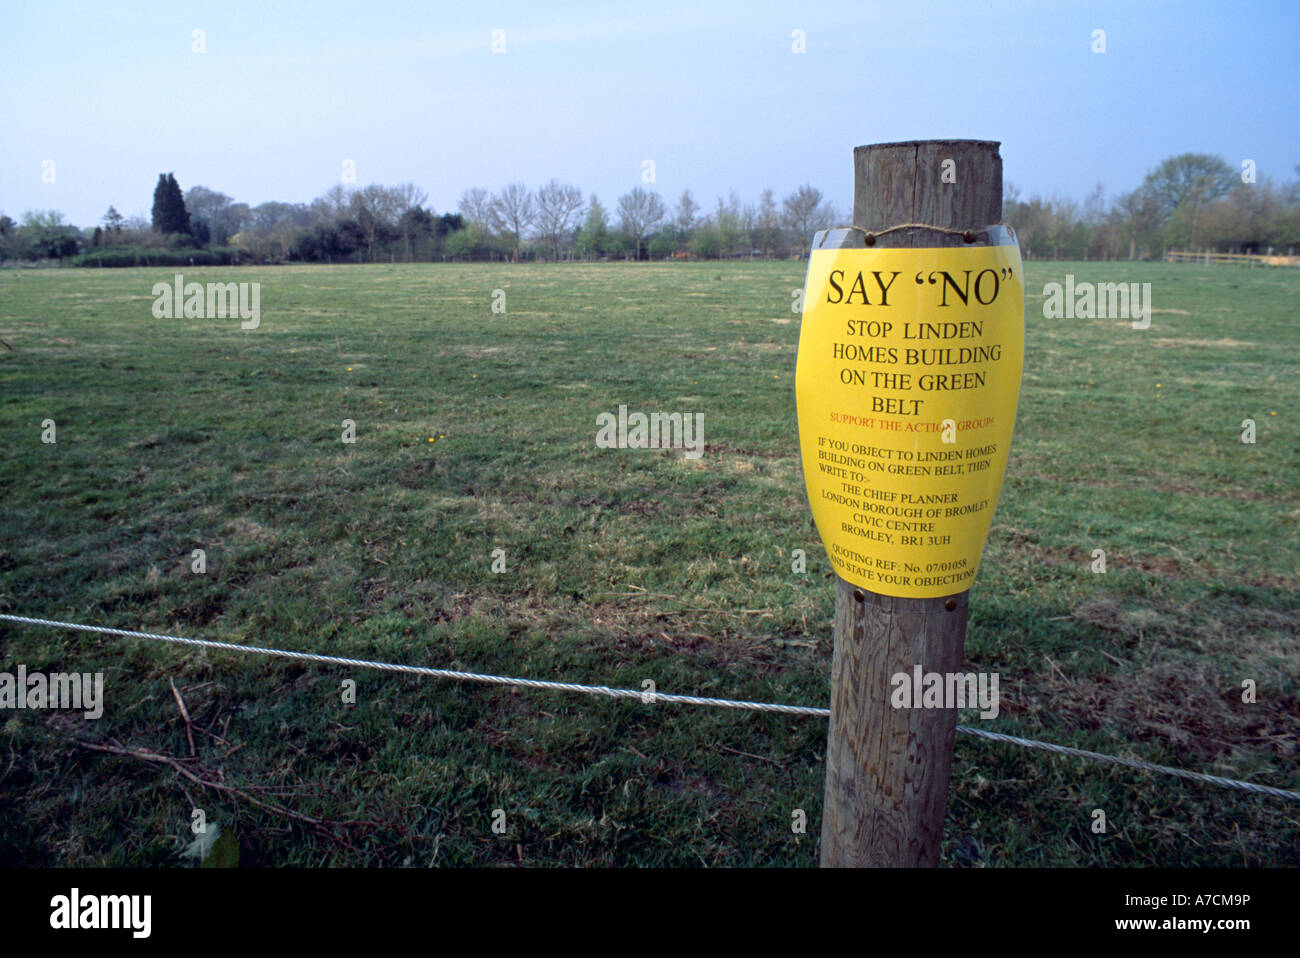 Protest notice on post, against building on greenbelt land, Biggin Hill, South London, Kent, England, UK. Stock Photo